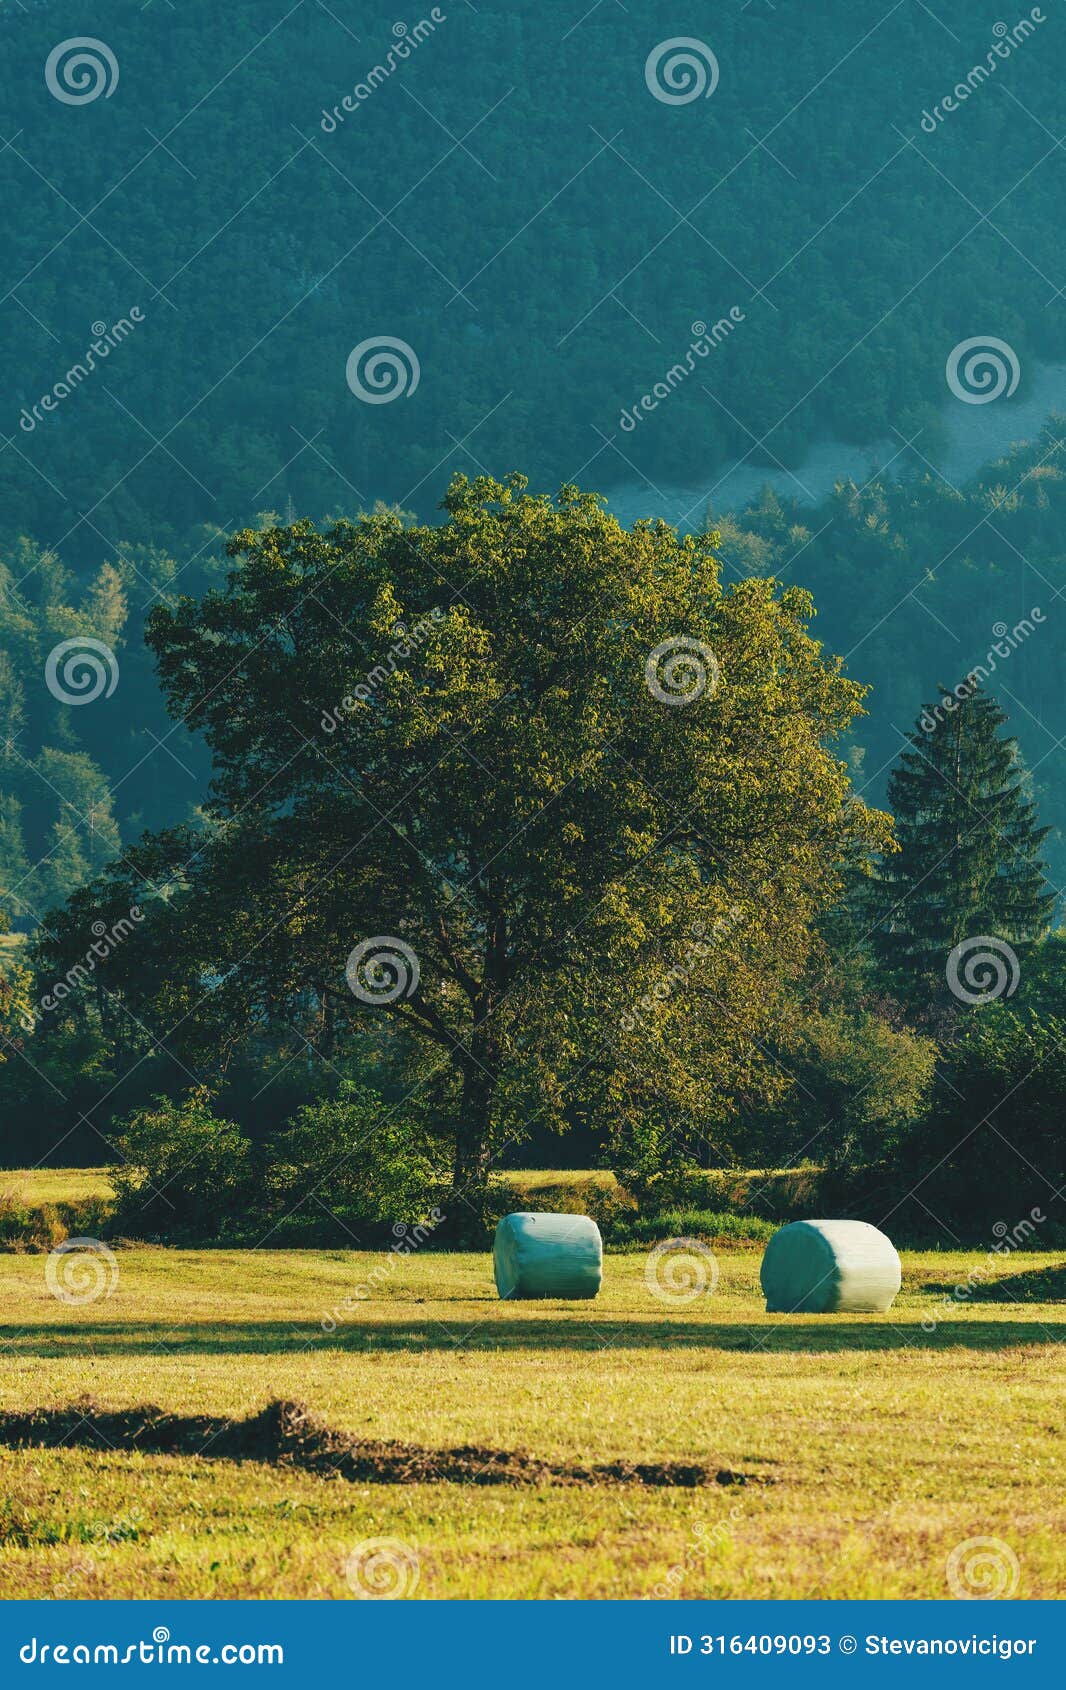 idyllic picturesque farm meadow with rolled forage bales of mowed grass wrapped in plastic in summer afternoon, detail from bohinj